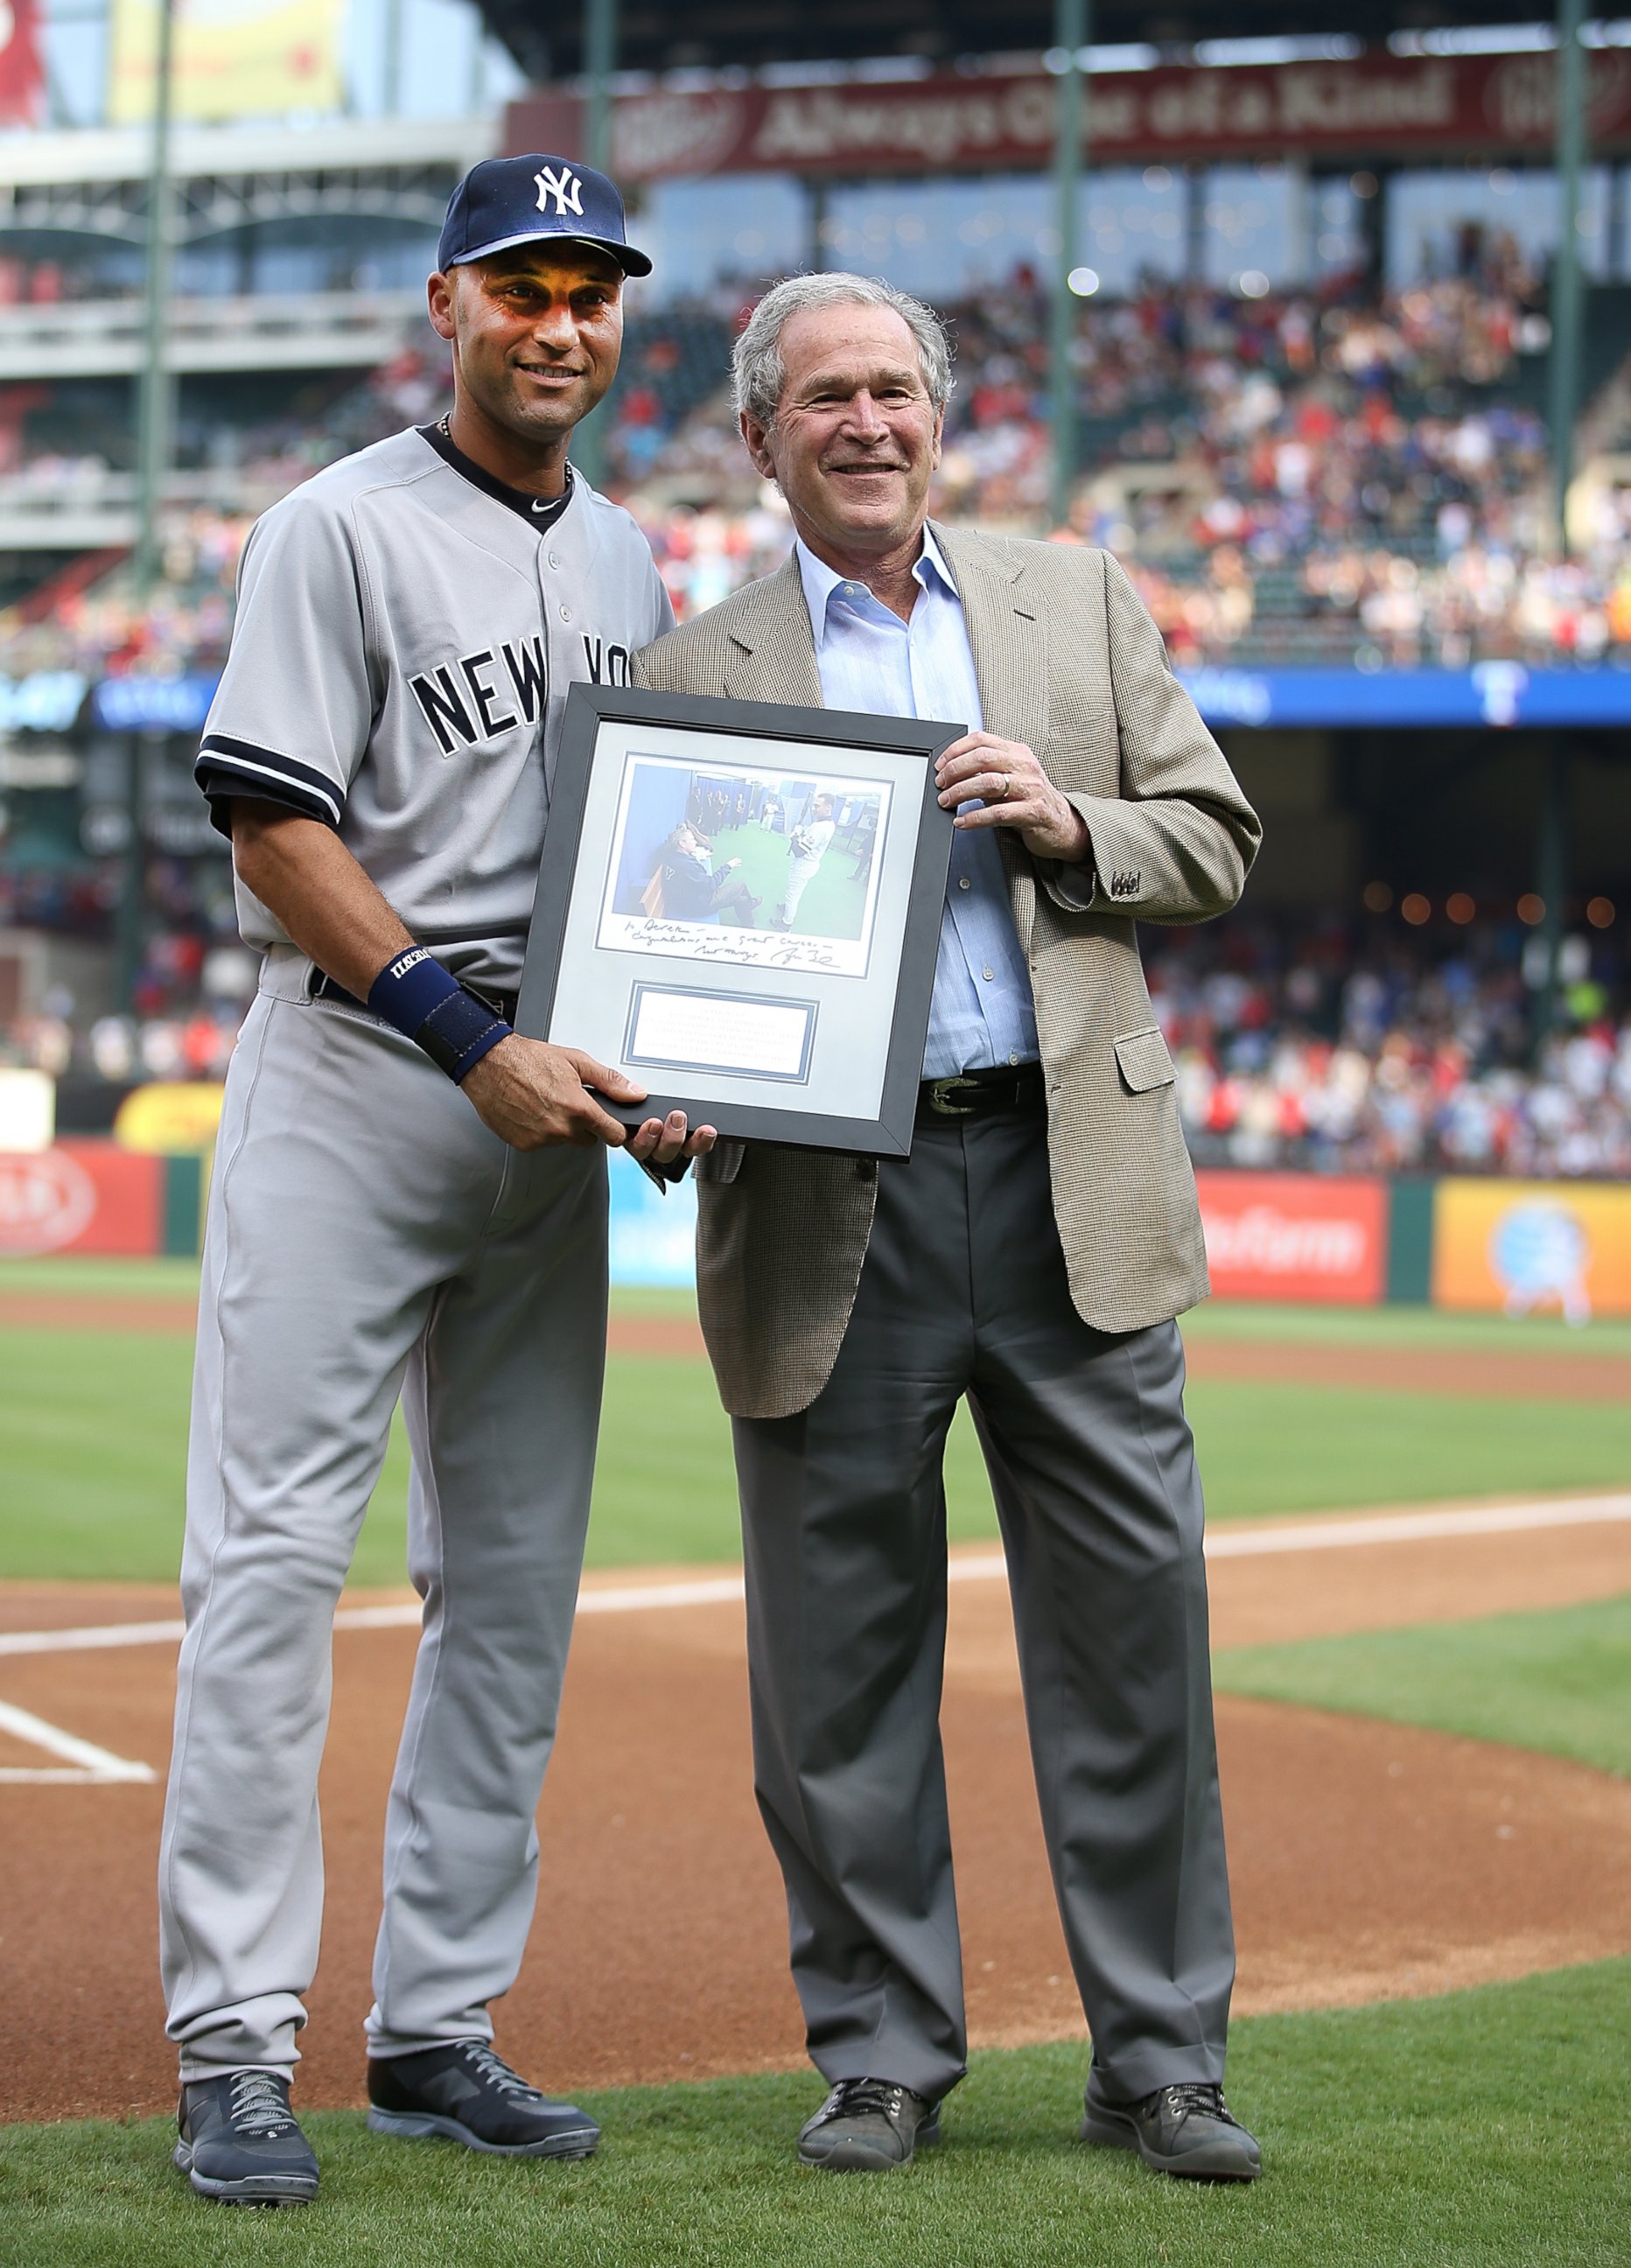 PHOTO: Derek Jeter is presented with a photo by President George W. Bush during a ceremony